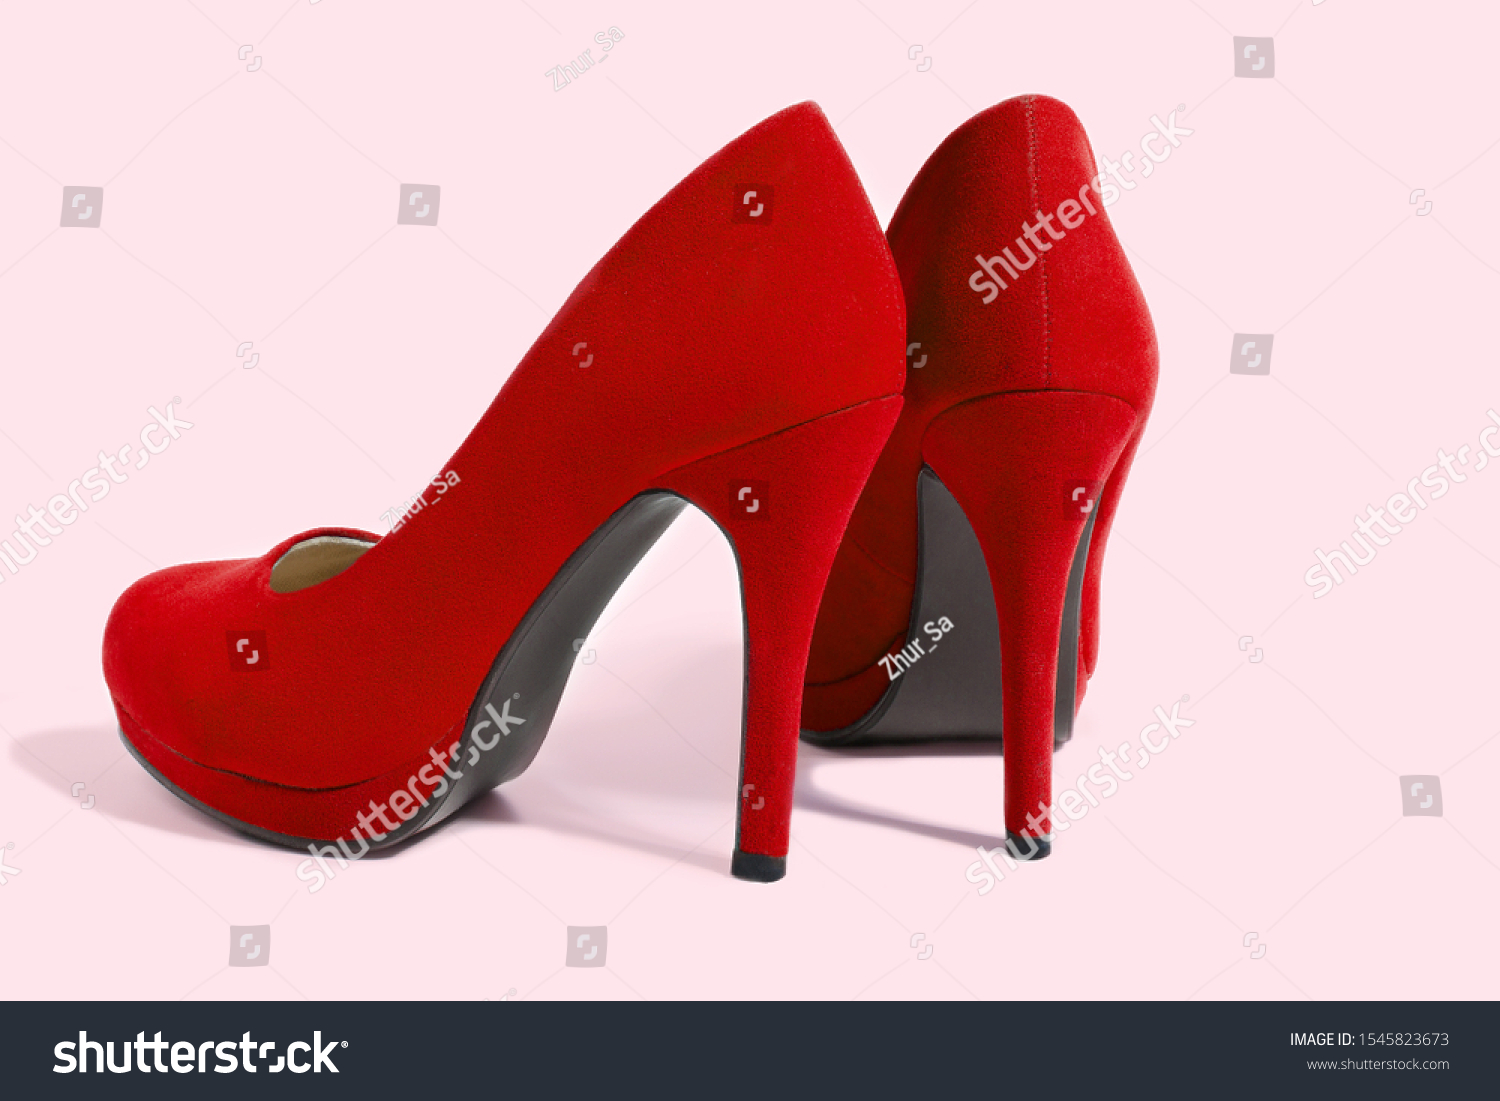 Red Woman Fashion High Heels Shoes Isolated On Pink Background. Closeup women bright summer footwear. Shopping and Fashion concept. Glamour and luxury ladies accessory. Selective focus #1545823673